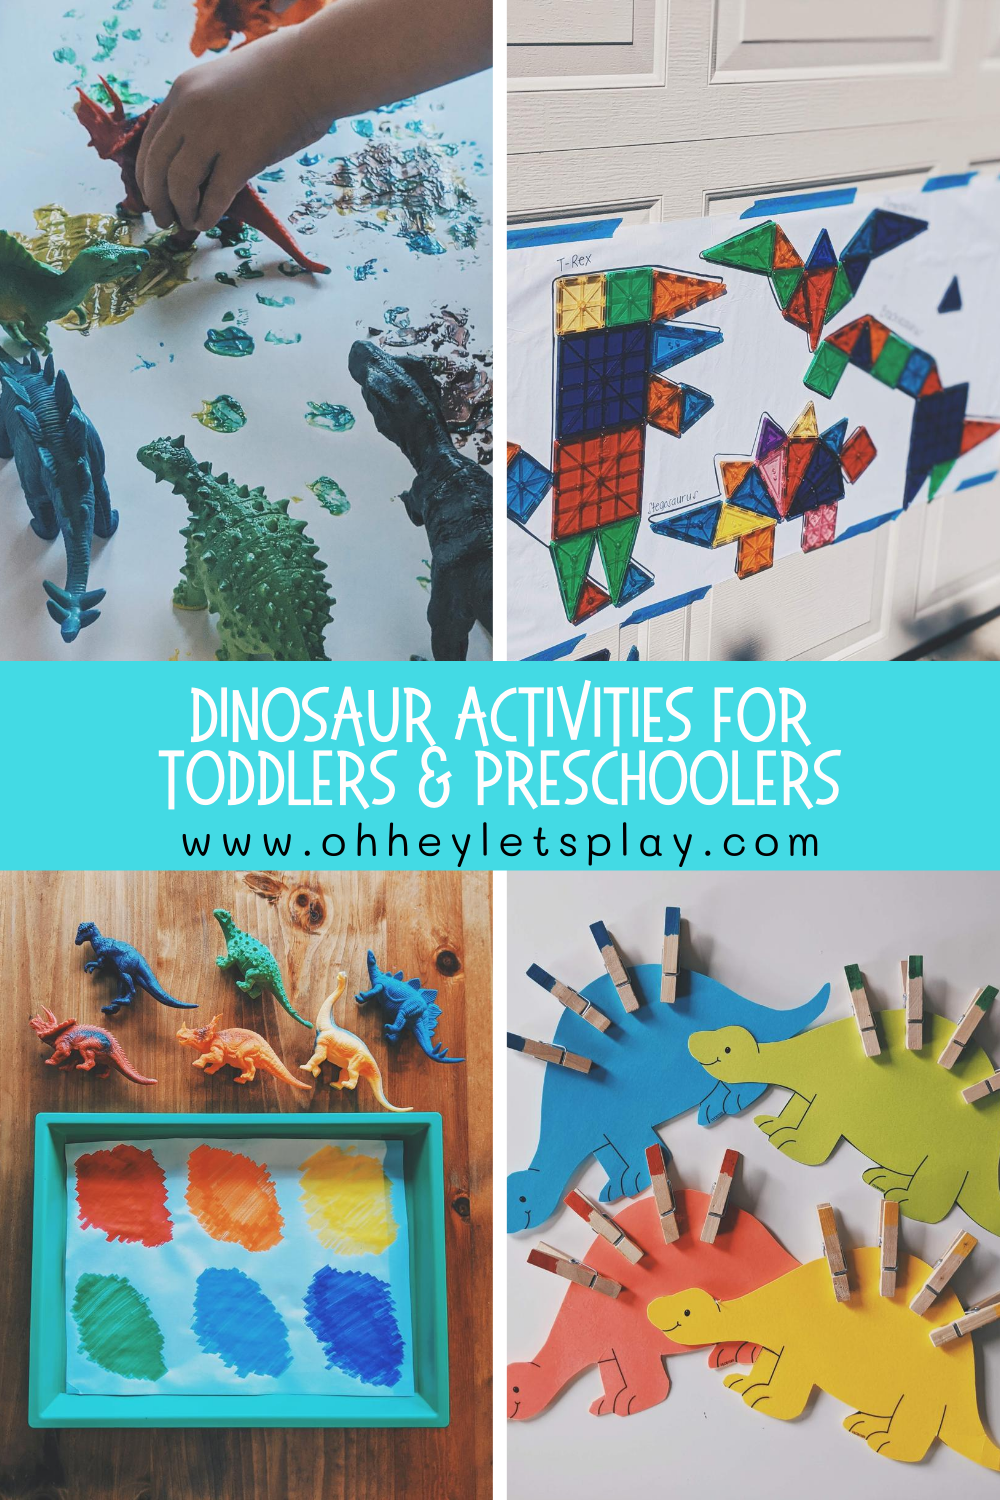 Dinosaur Matching Game for Toddlers - Simple Fun for Kids